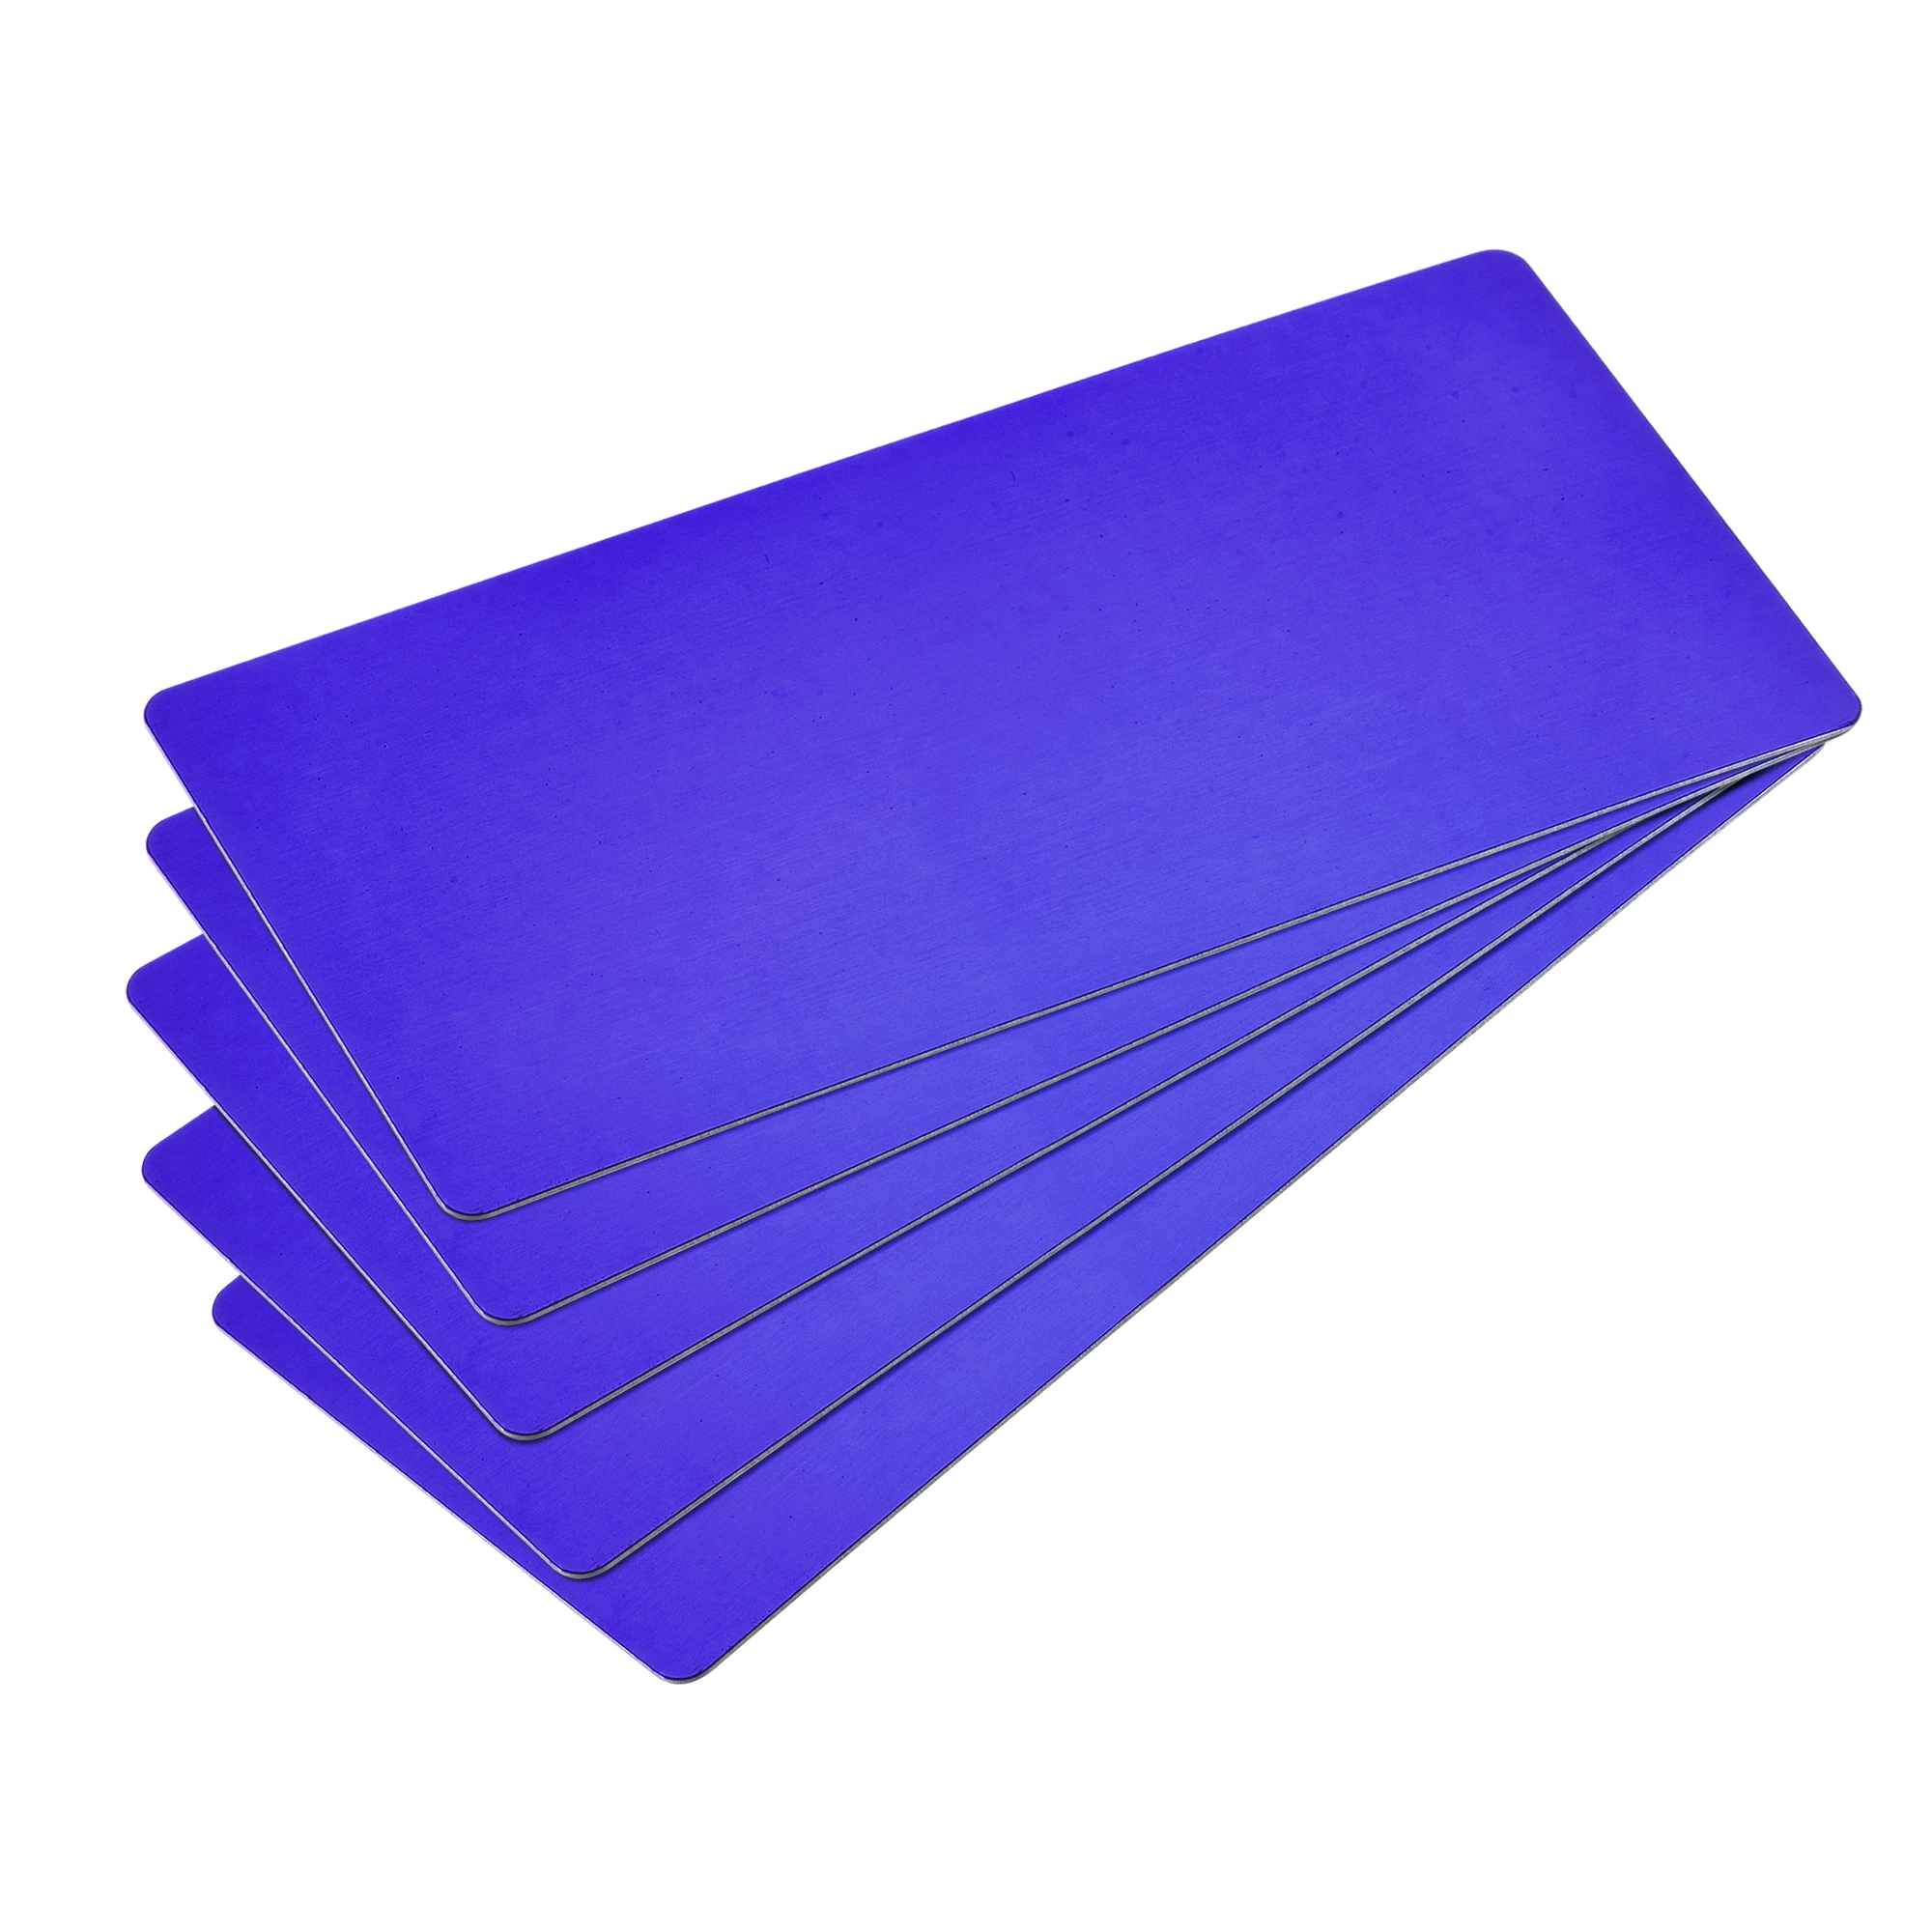 

Uxcell Blank Metal Card 100x50x0.5mm Painted Aluminum Plate Dark Blue 10 Pcs for Laser Engraving